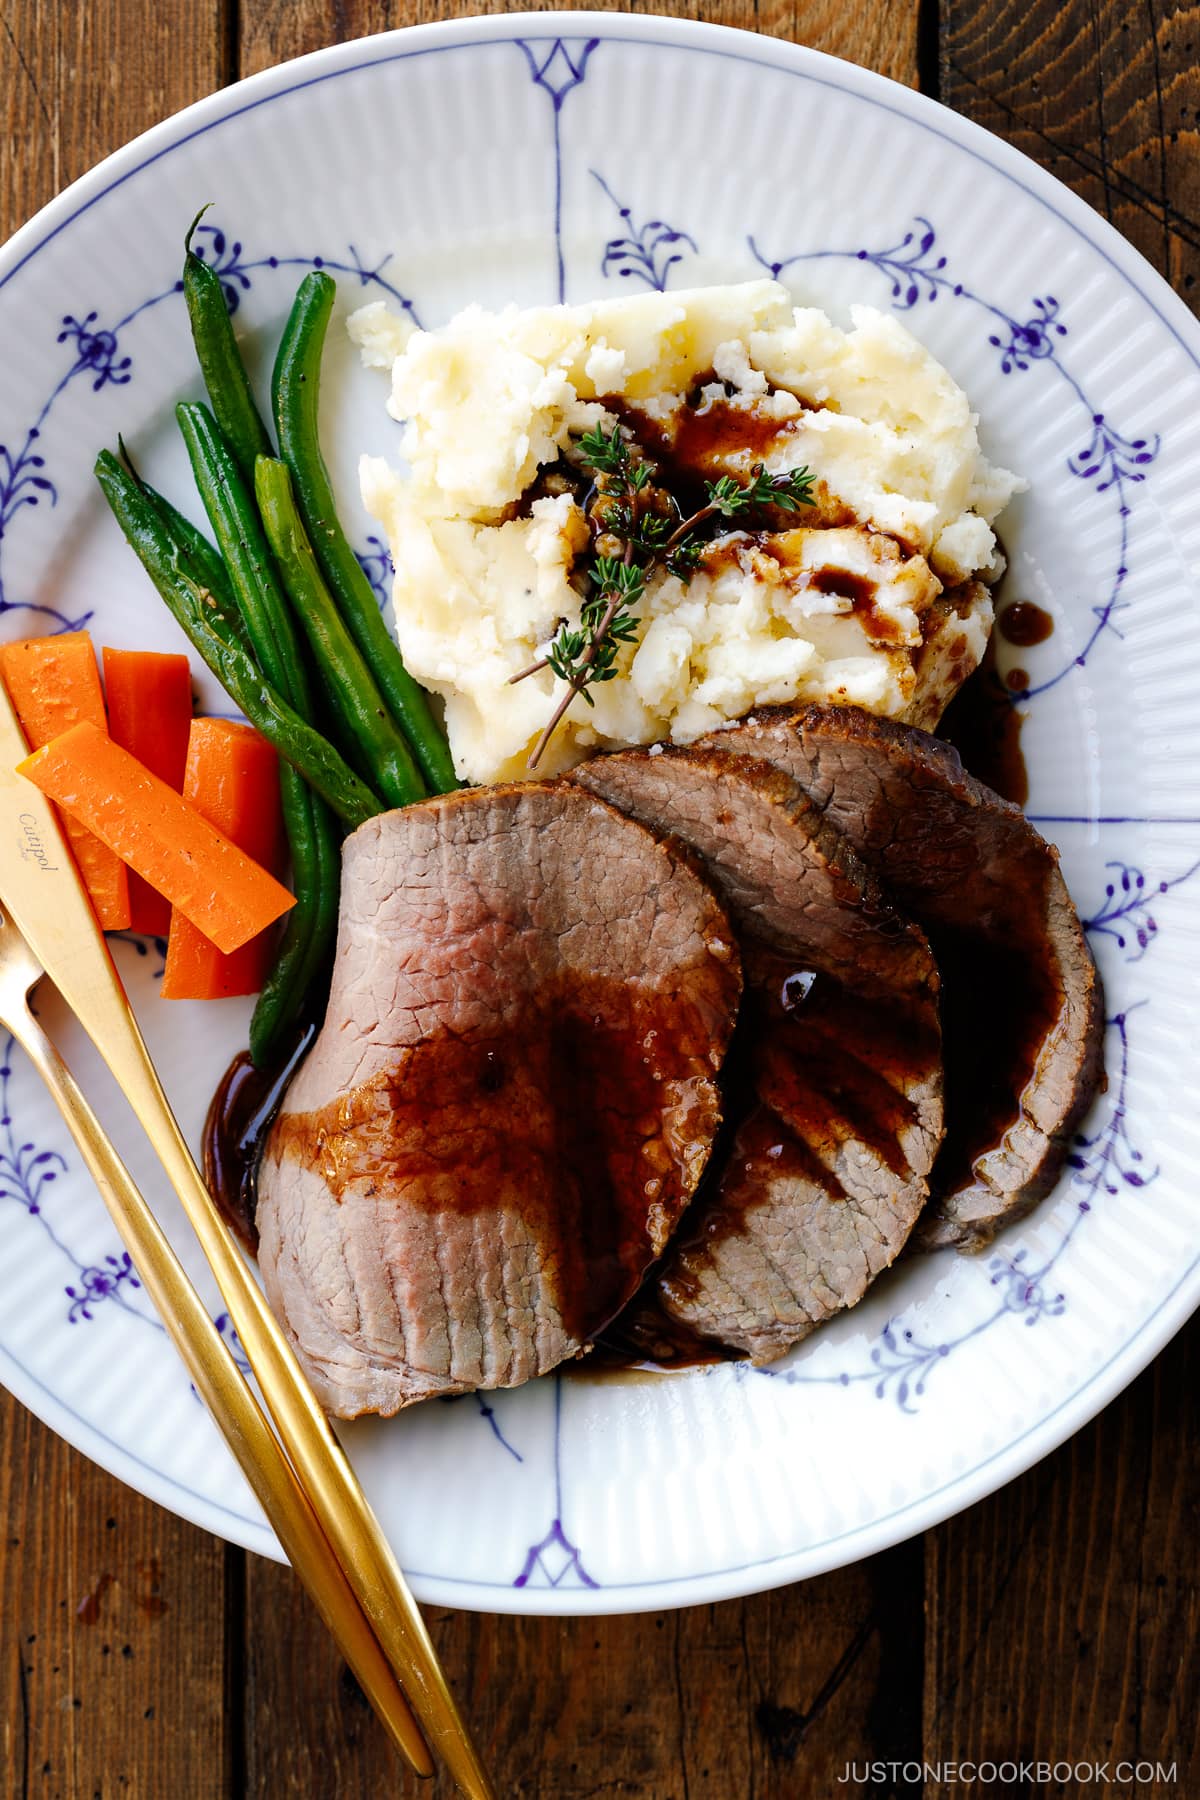 A white and blue plate containing roast beef with gravy, mashed potatoes, green beans, and carrot.